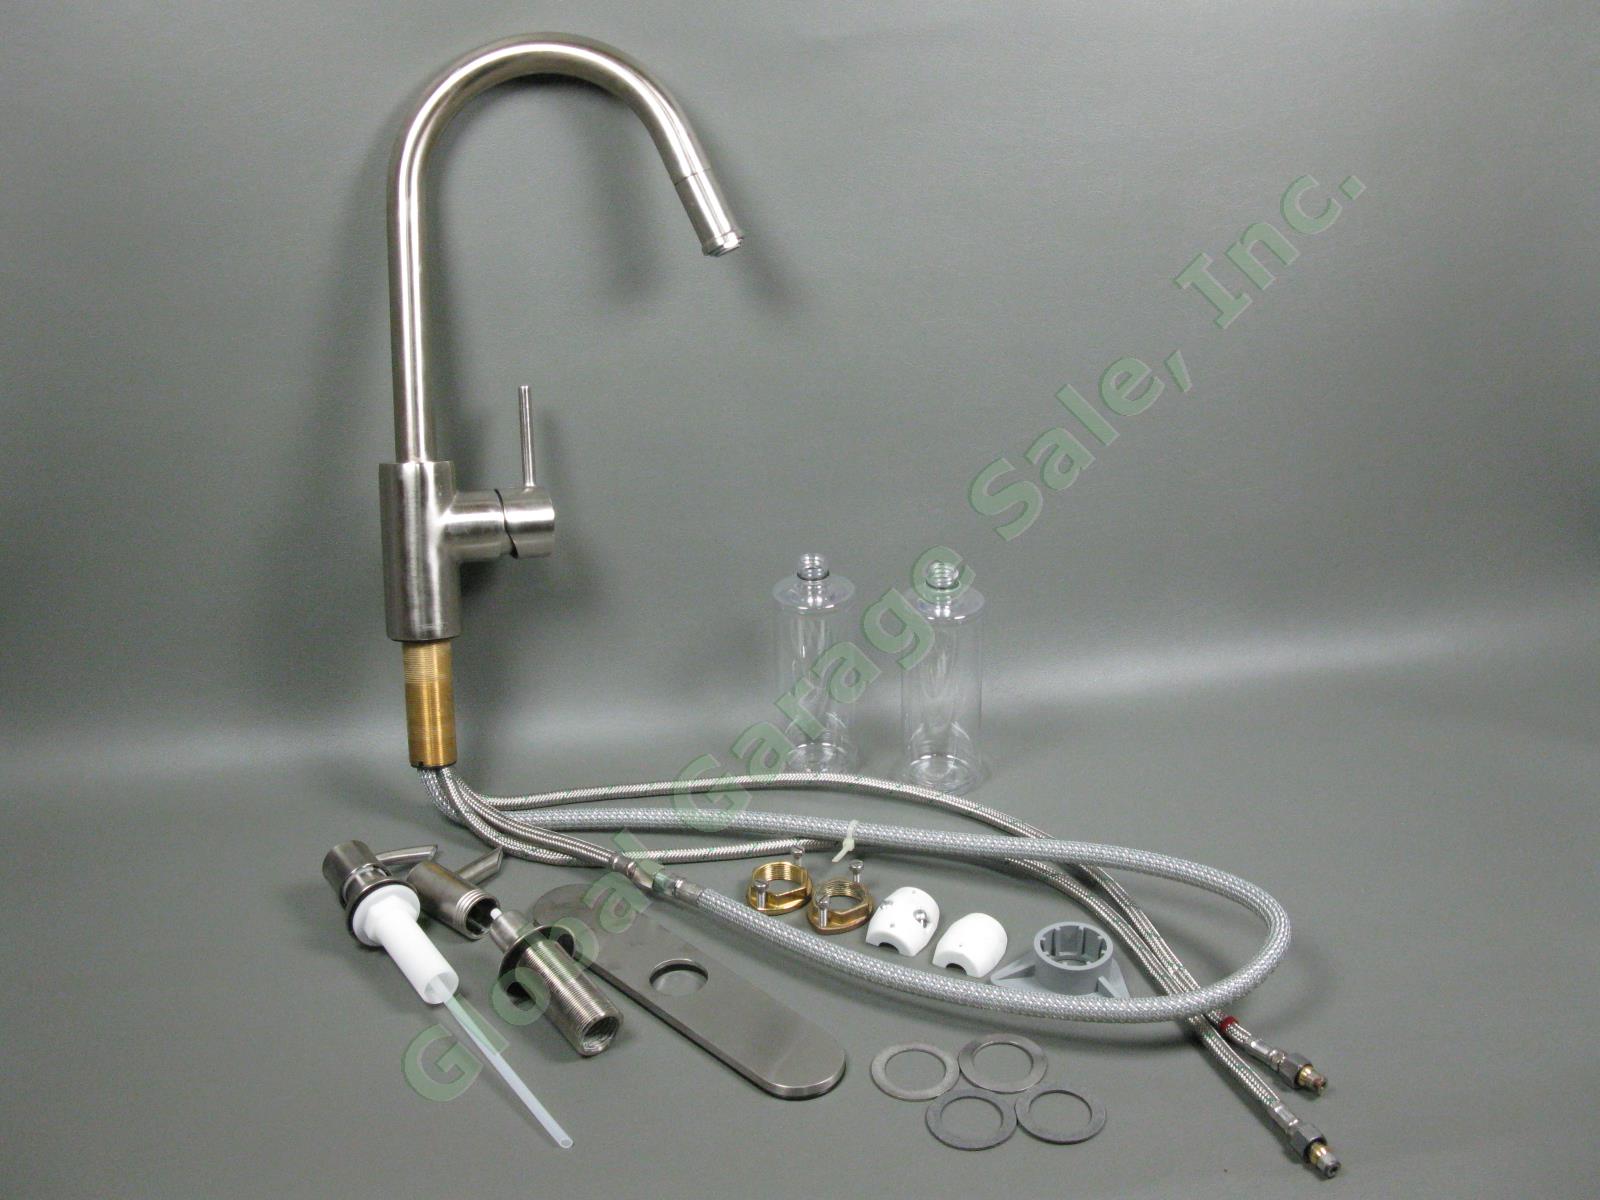 Hansgrohe 14872 Talis S Pull-Down Single Function Chrome High-Arc Kitchen Faucet